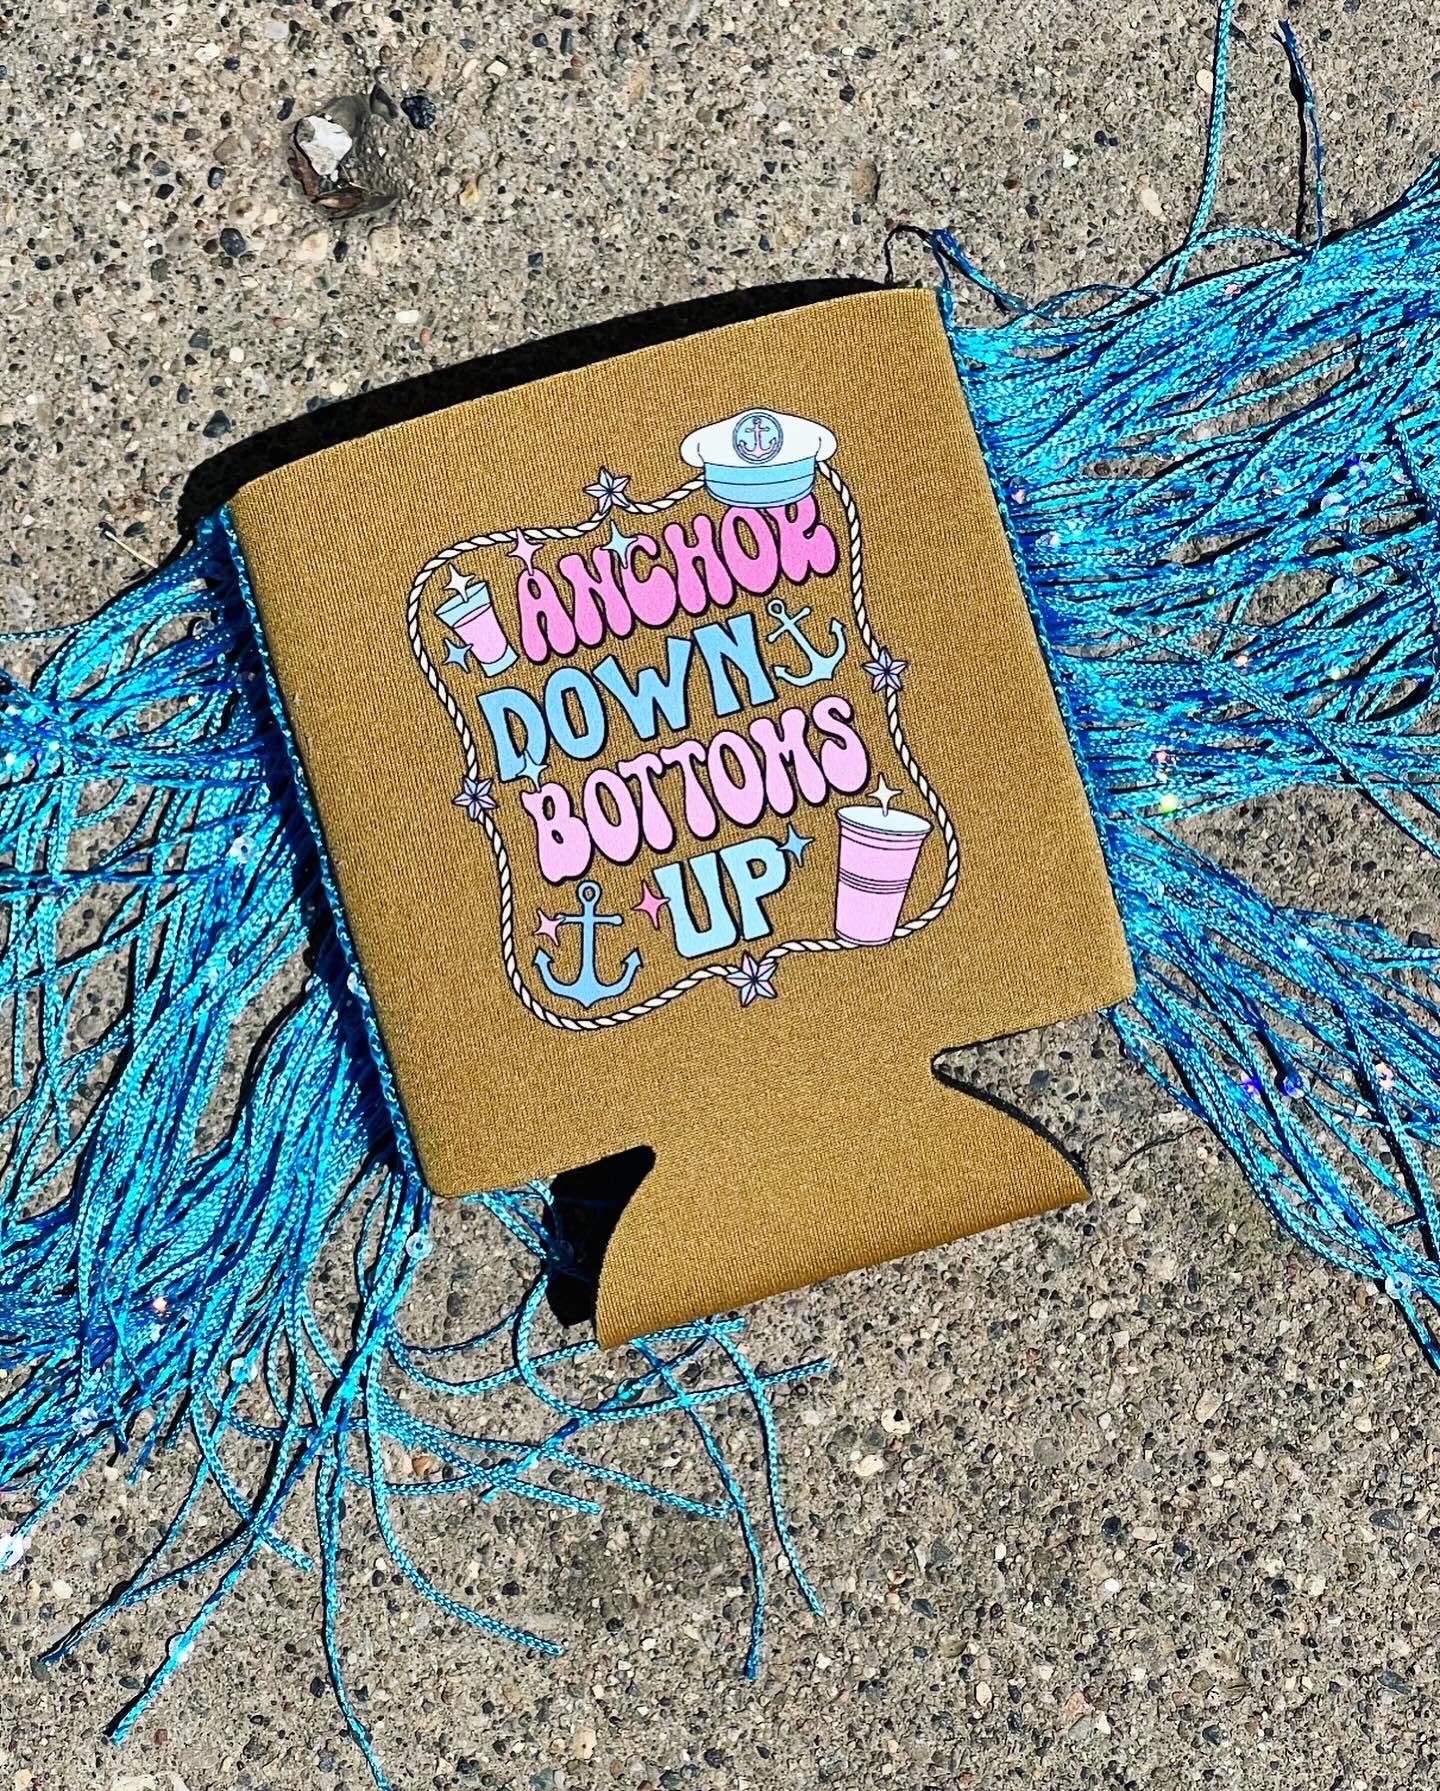 Anchors Down Bottoms Up coozie